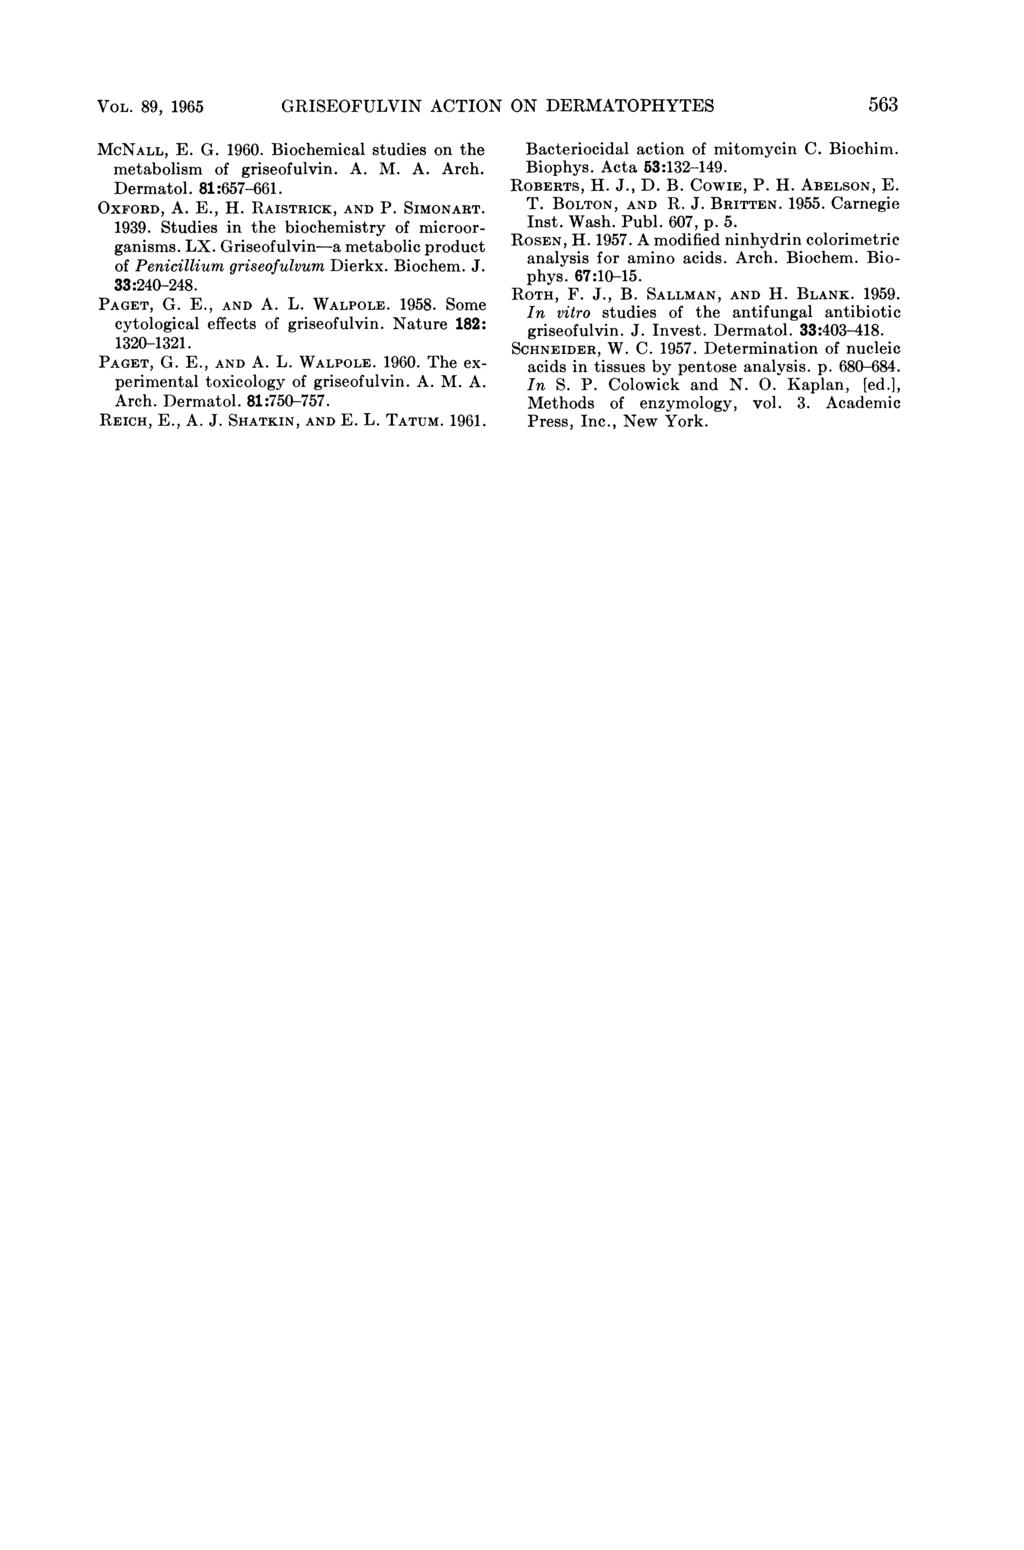 VOL. 89, 1965 GRISEOFULVIN ACTION ON DERMATOPHYTES 563 McNALL, E. G. 196. Biochemical studies on the metabolism of griseofulvin. A. M. A. Arch. Dermatol. 81:657-661. OXFORD, A. E., H.